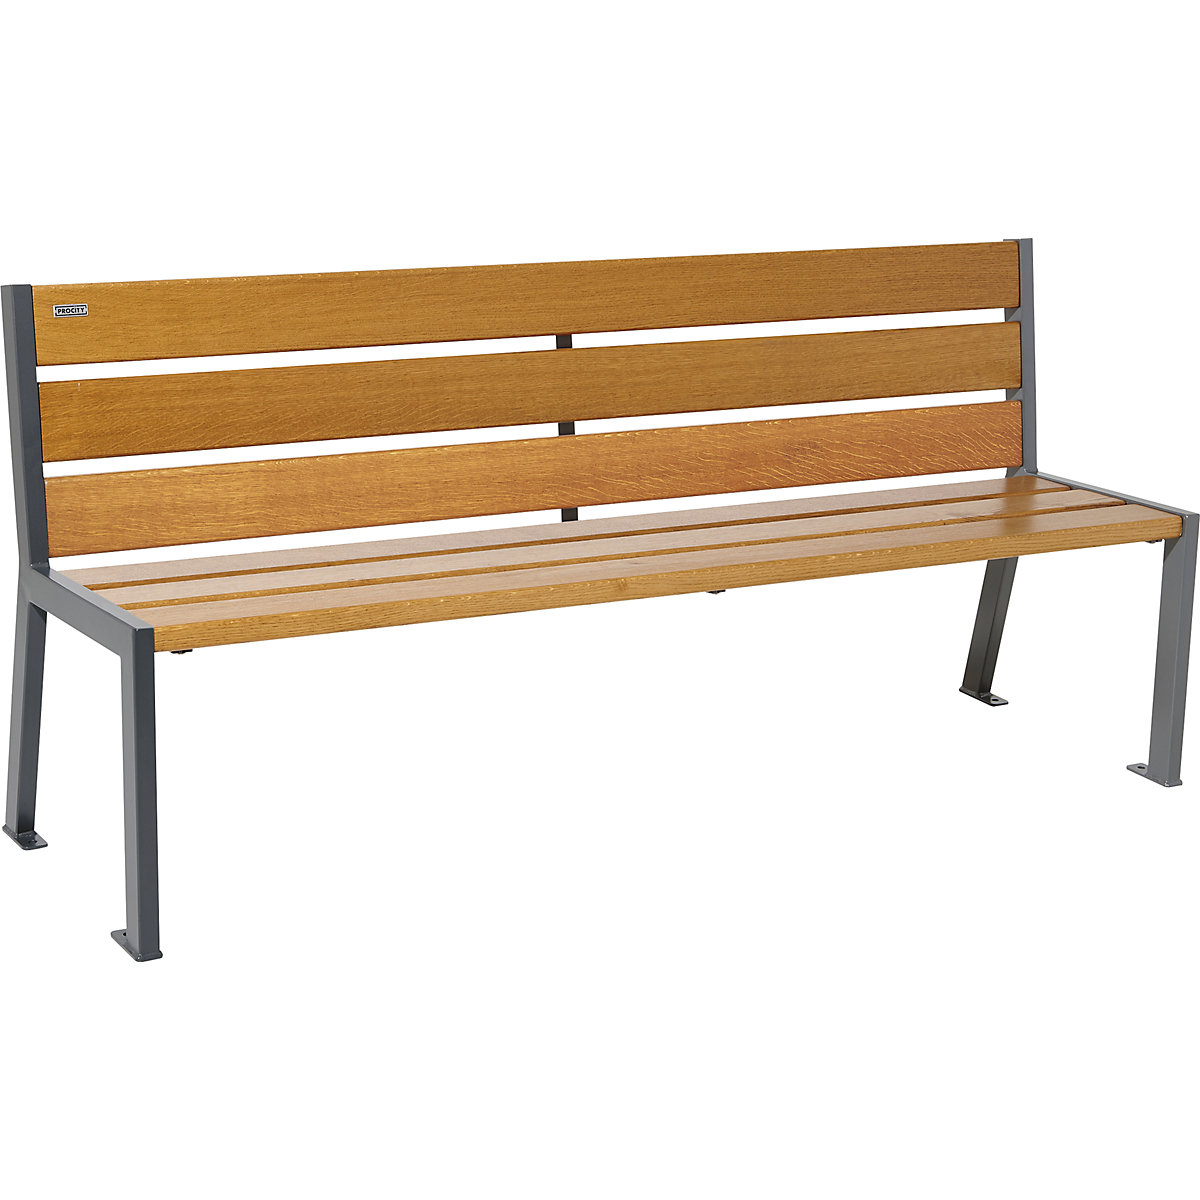 SILAOS® bench made of wood – PROCITY, with back rest, length 1800 mm, charcoal, light oak finish-2